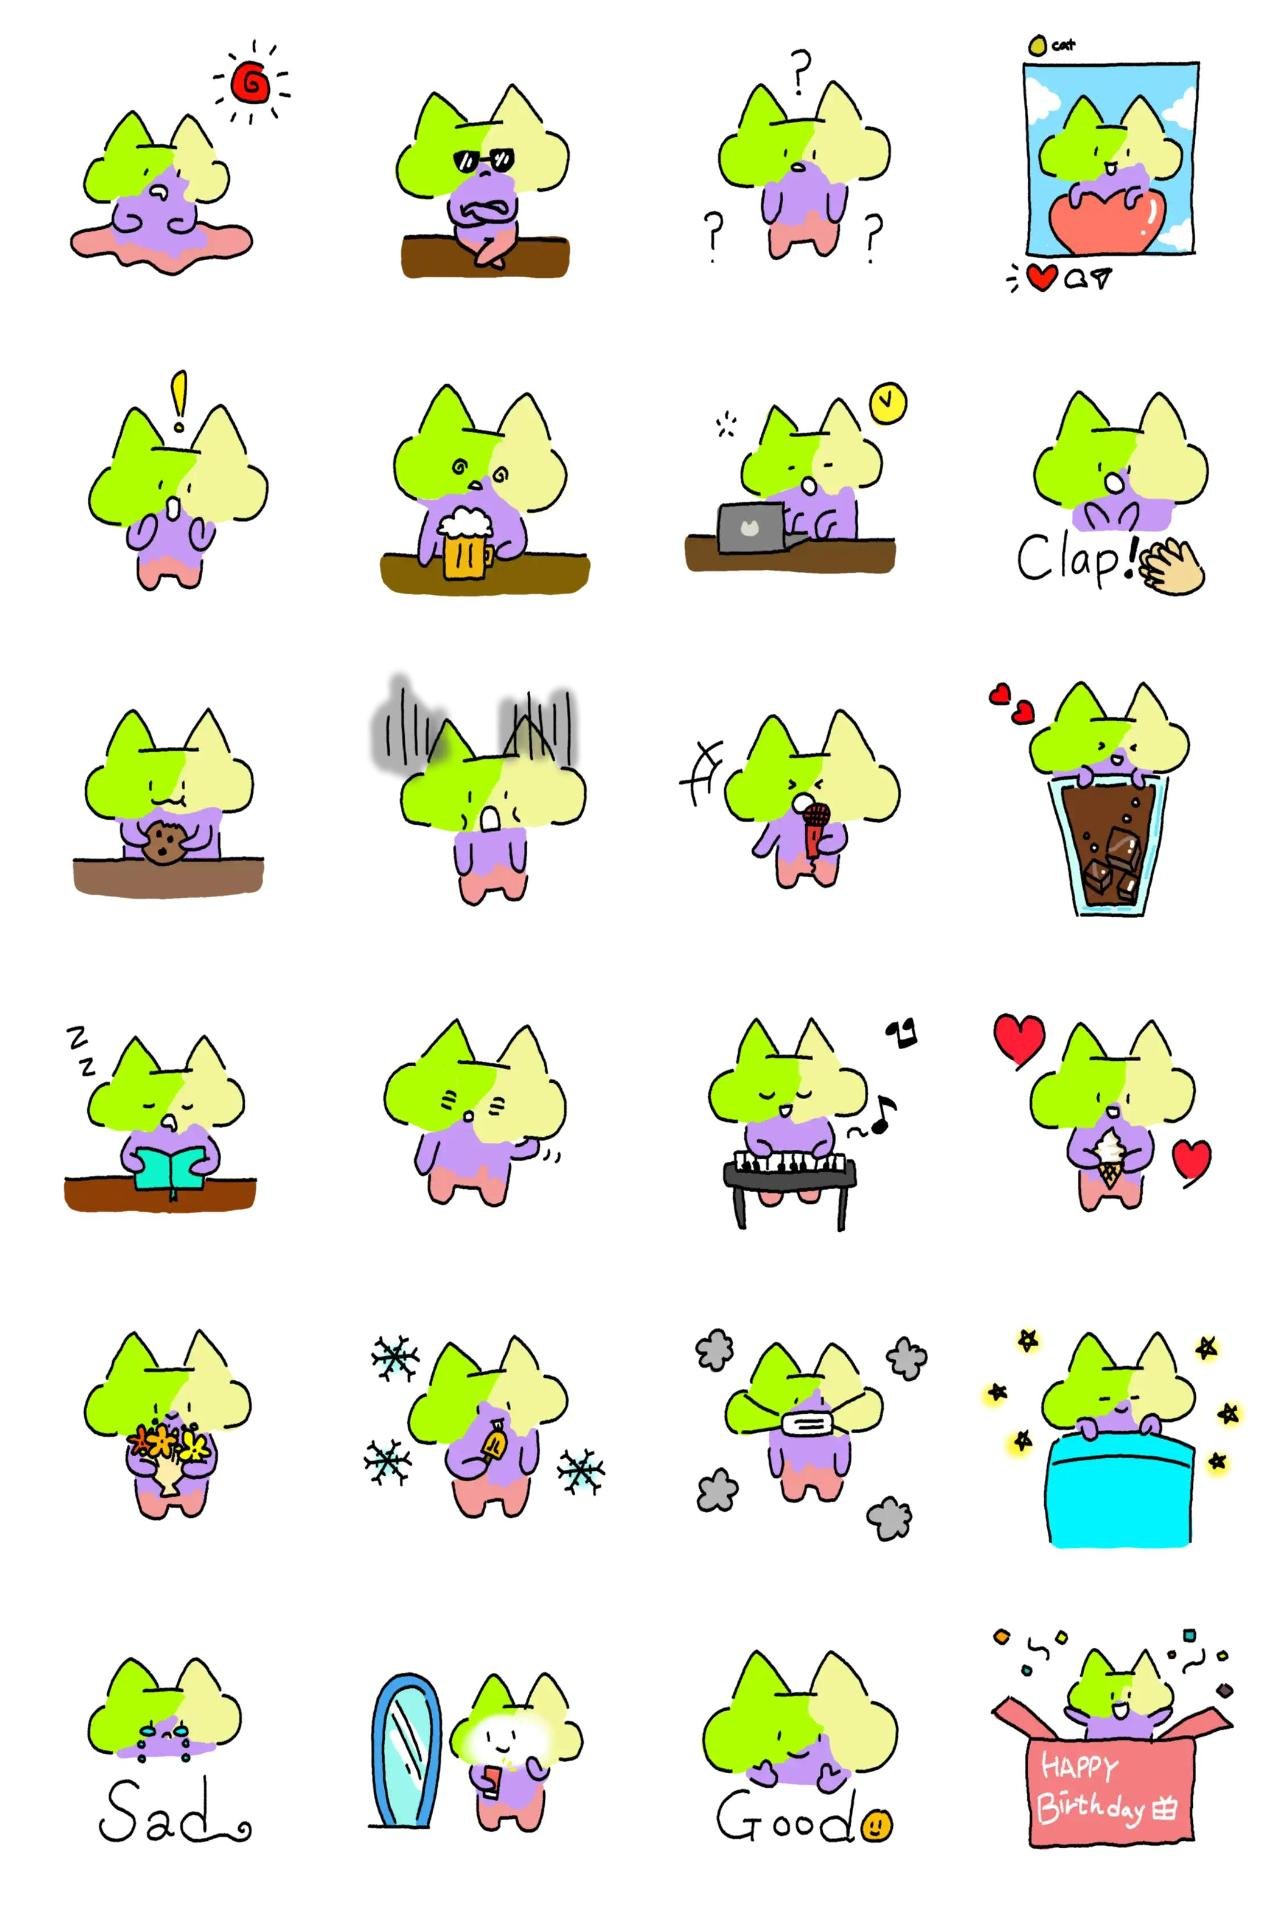 Colorful cat Animals sticker pack for Whatsapp, Telegram, Signal, and others chatting and message apps